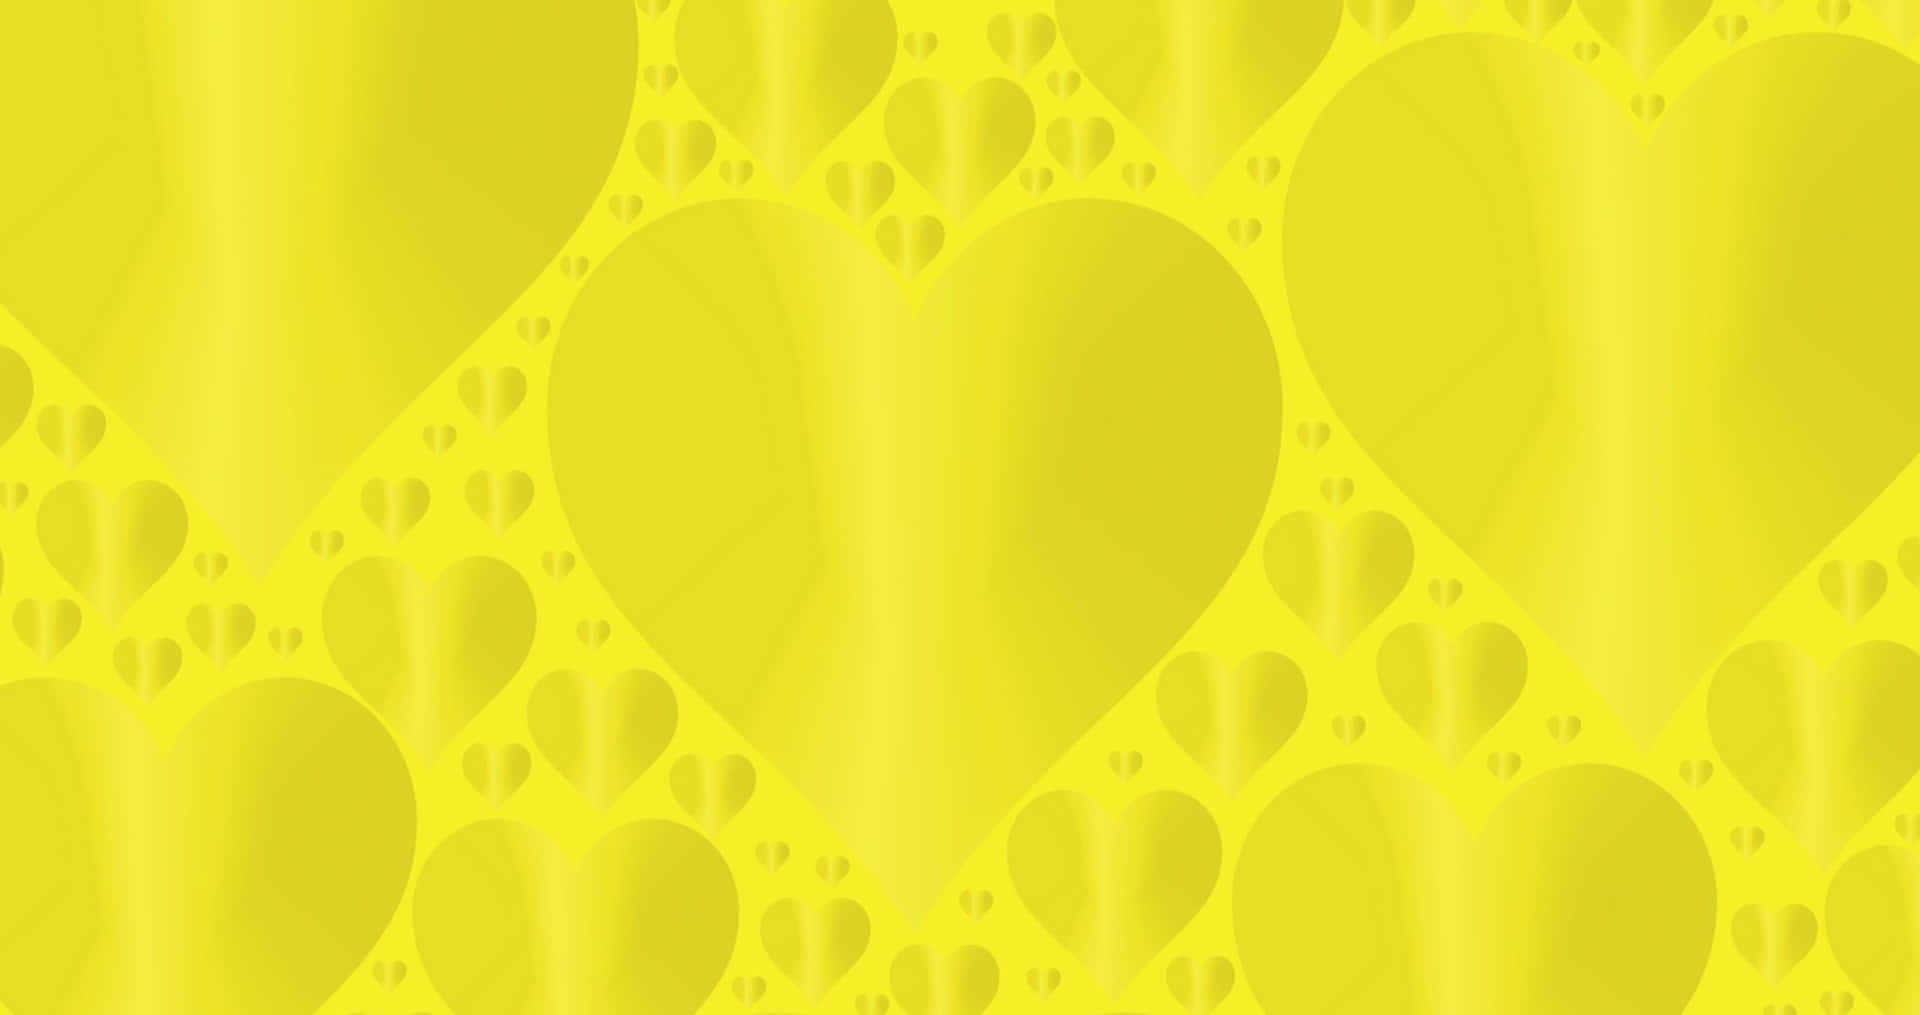 Radiant Yellow Heart on a Brilliant Backdrop Wallpaper